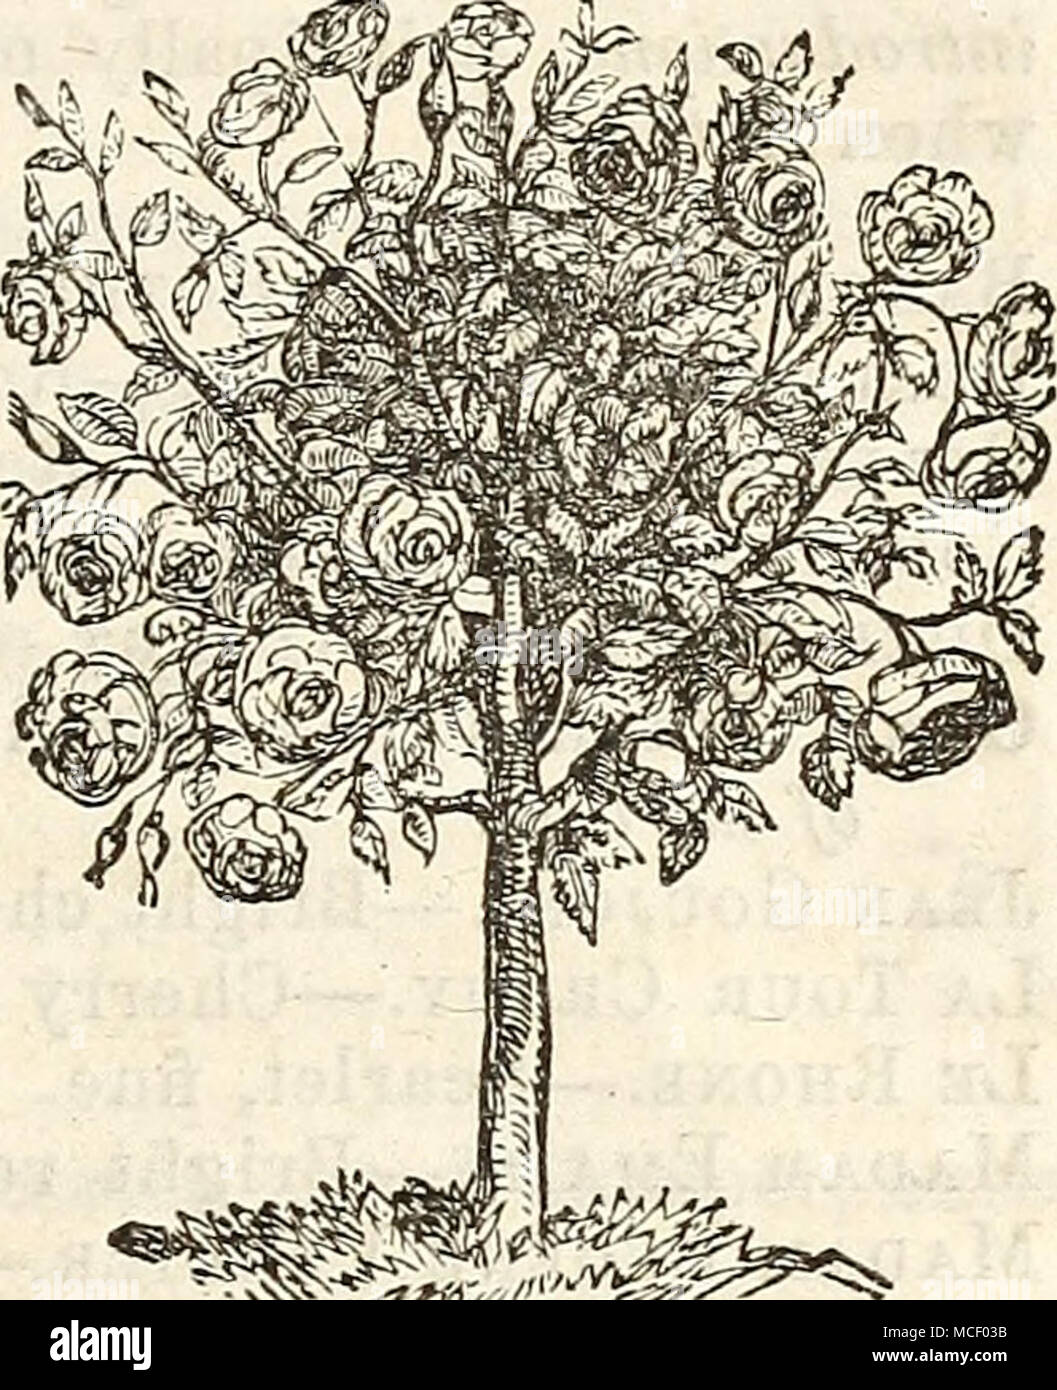 . F^g.i: Fig. 2. For the management of such, the chief requisites are the yearly ap-^ plication of old manure, cutting out old wood, and leaving the new and best shoots. Tree, or Standard Roses, are greatly admired when well trained, but they require much care. A specimen is shown in figure 2. They are usually made by budding on vigorous standards, about two feet high. The buds, when growing, form the head. Fillar Roses can be formed by training strong growing varieties on the trunk of a small tree of cedar or other durable wood, the branches being cut within eight or ten inches of the stem. S Stock Photo